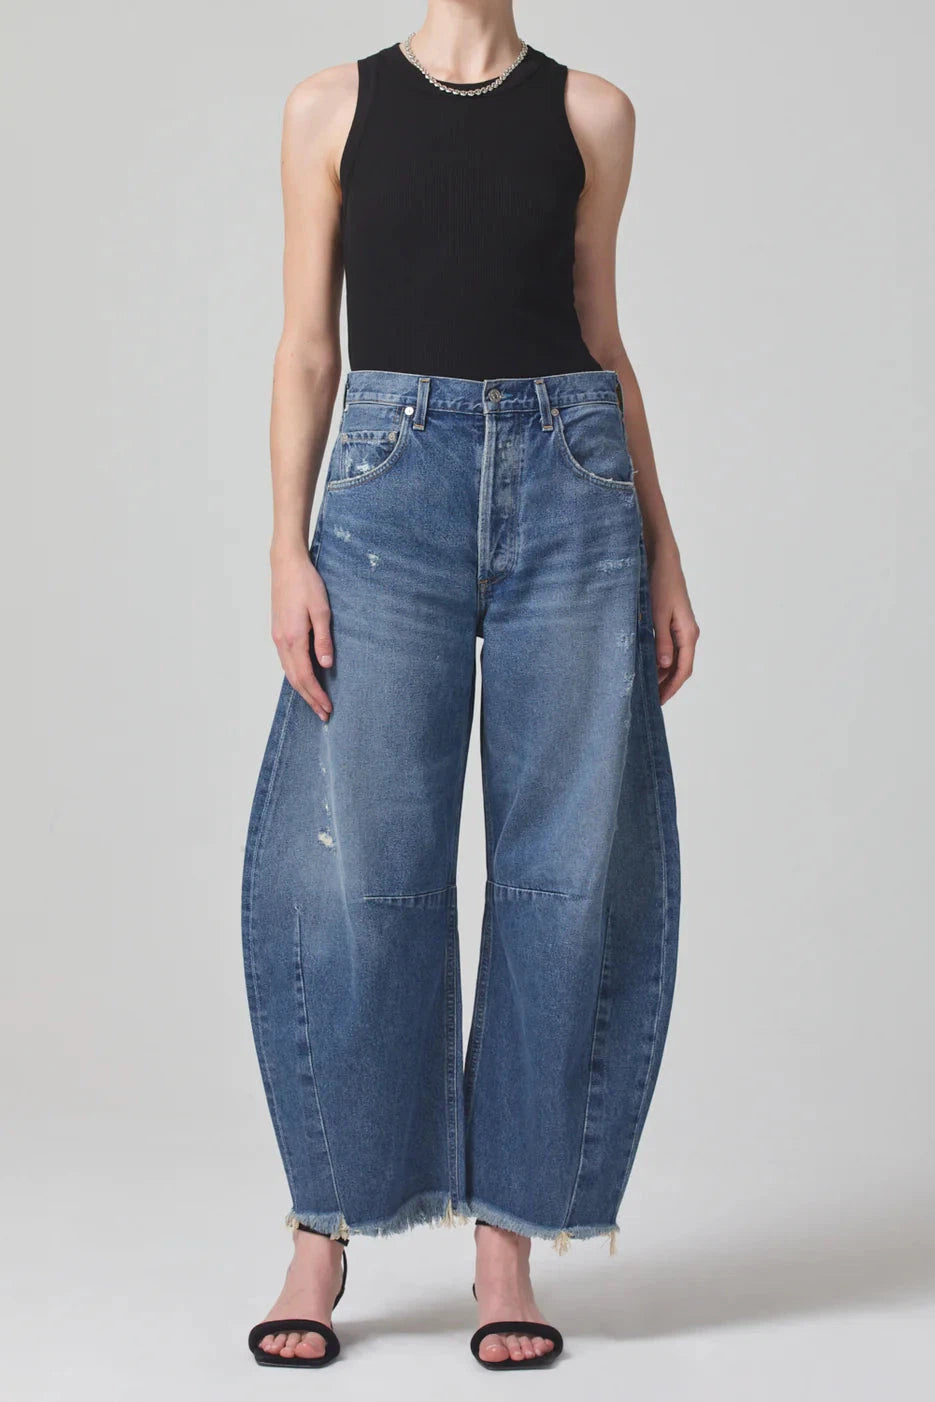 CITIZENS OF HUMANITY HORSESHOE JEANS IN MAGNOLIA